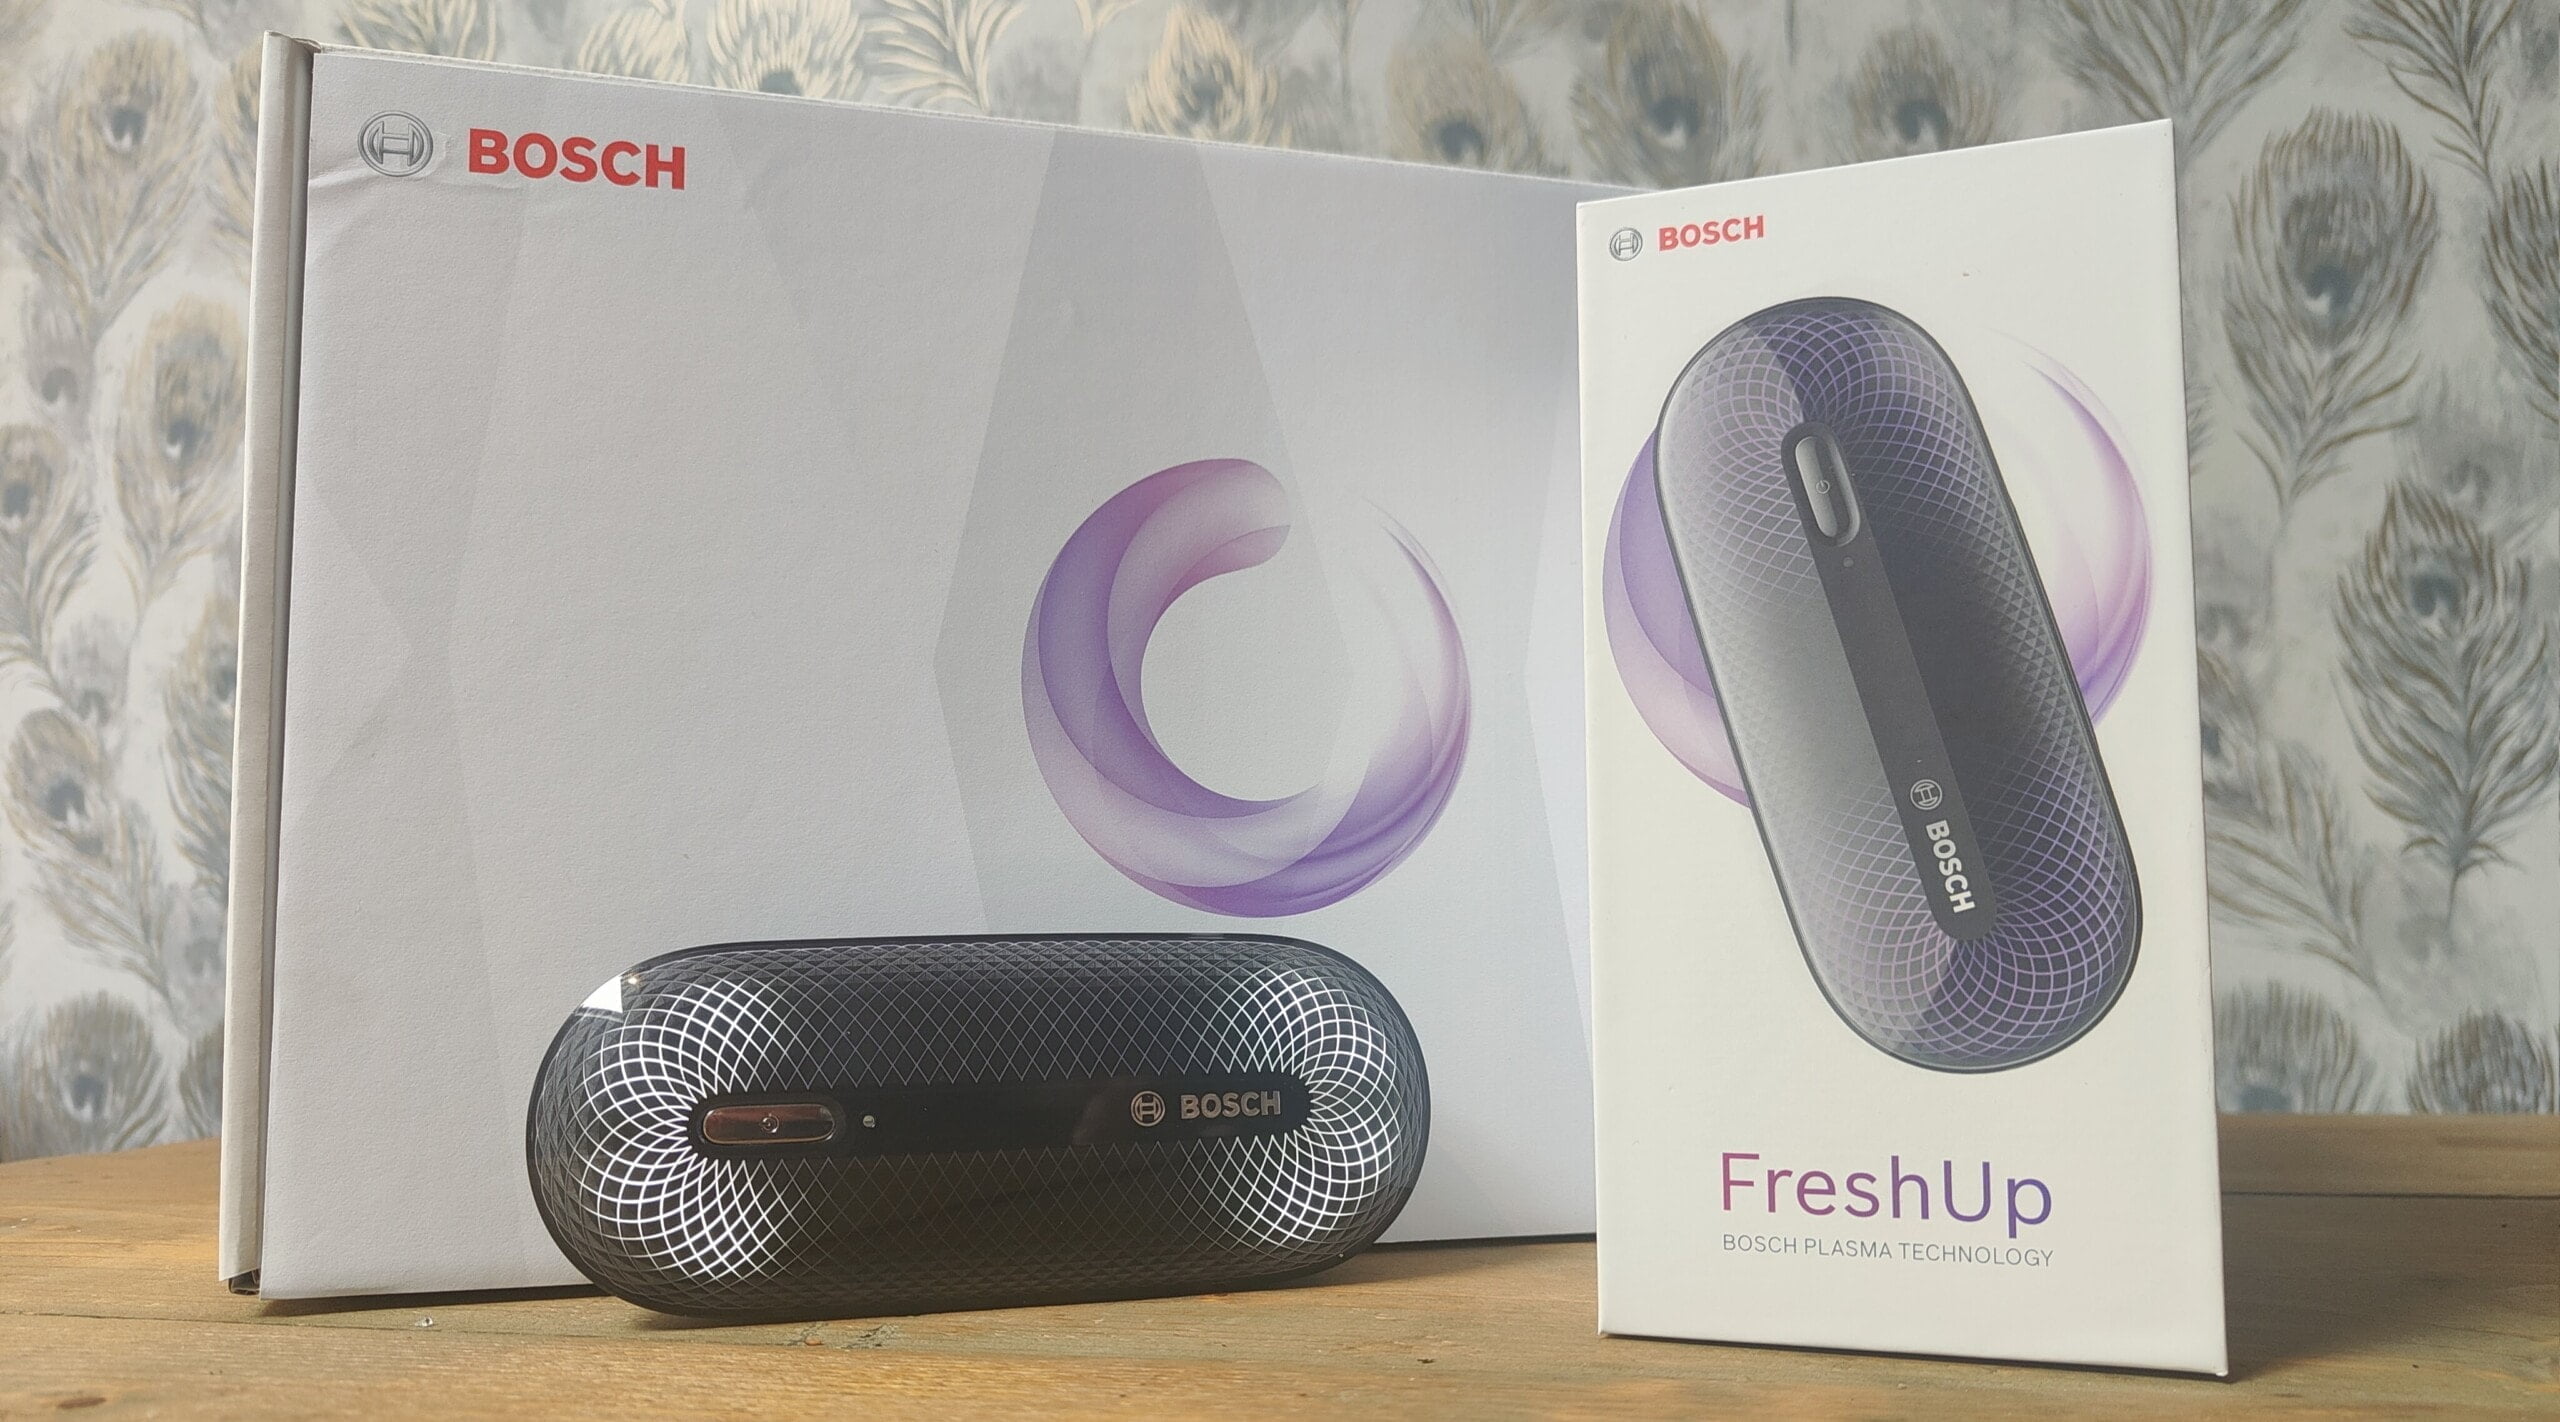 Bosch FreshUp Initial Review – A portable plasma cleaner to remove smells from your clothes